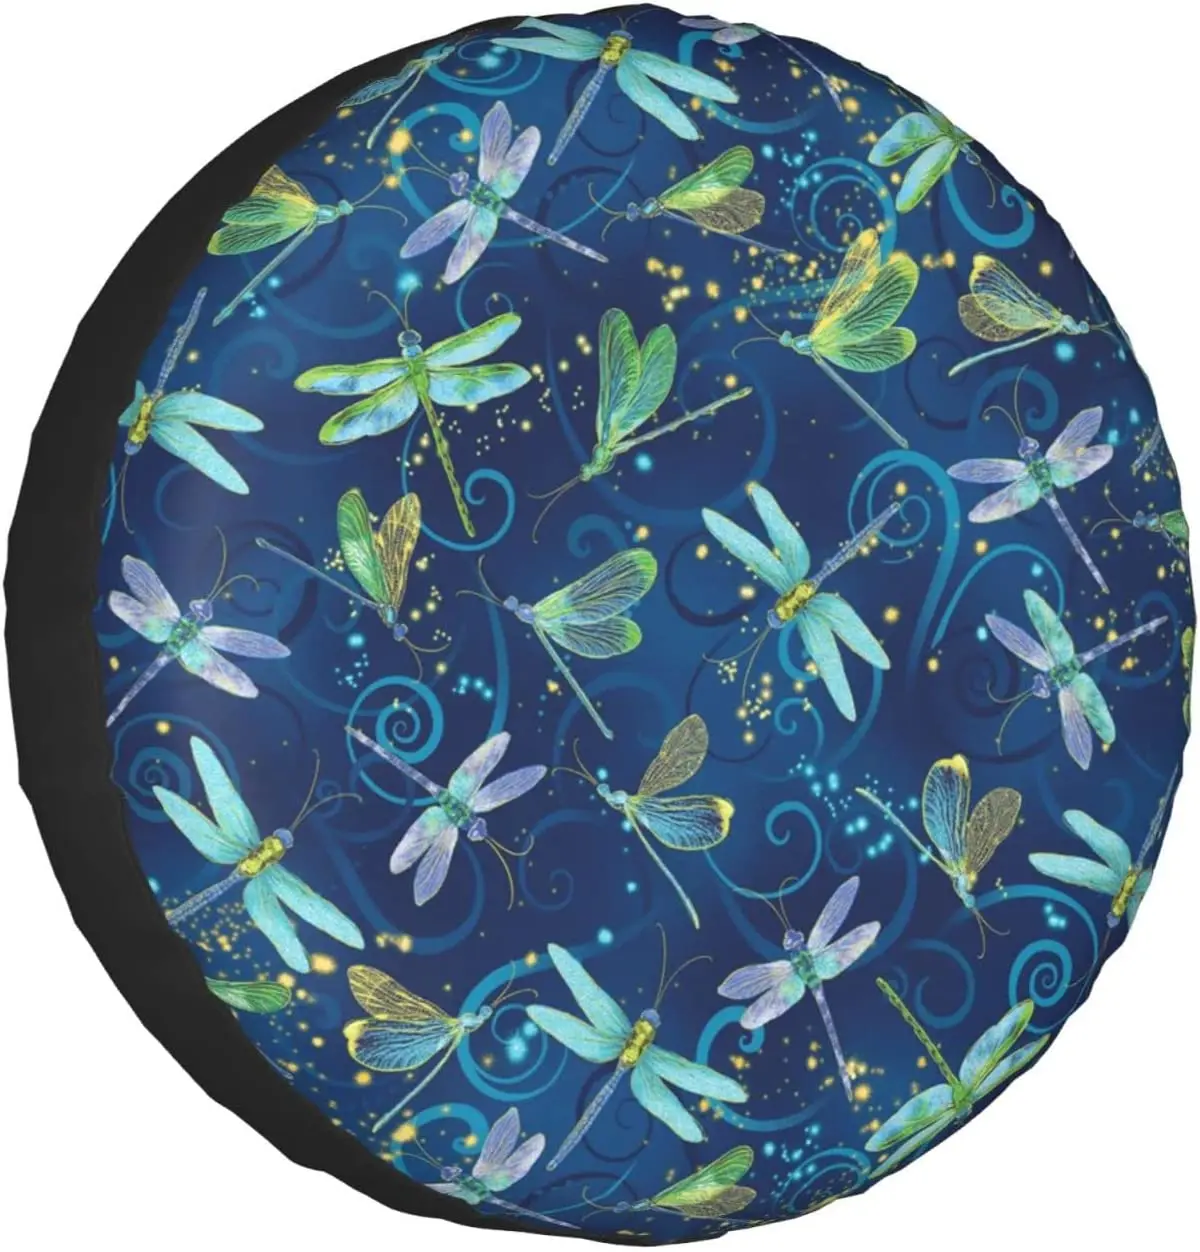 

Blue Dragonfly Printed Spare Tire Cover Waterproof Tire Wheel Protector for Car Truck SUV Camper Trailer Rv 14"-17"